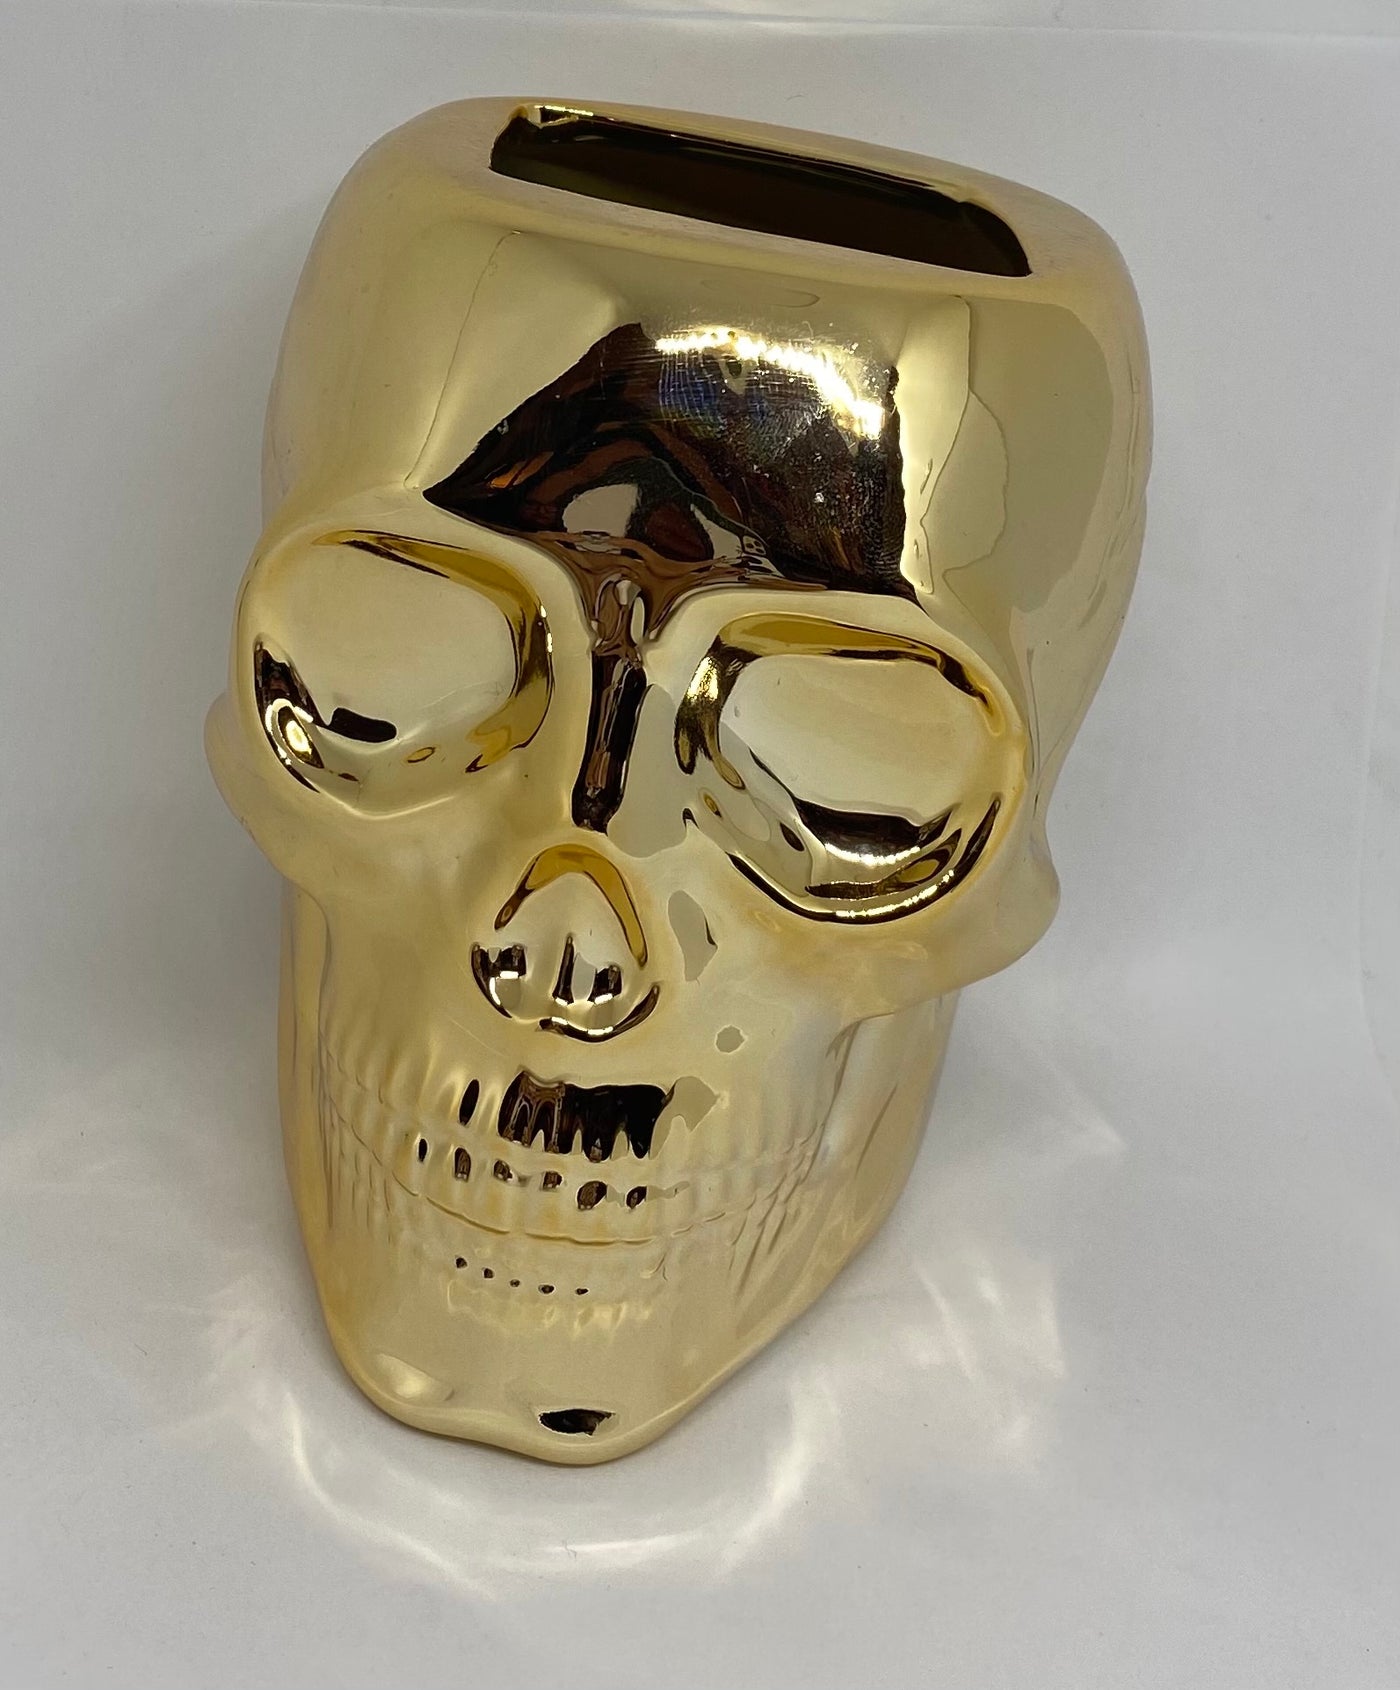 Bath and Body Works 2021 Halloween Gold Skull Foaming Soap Holder New